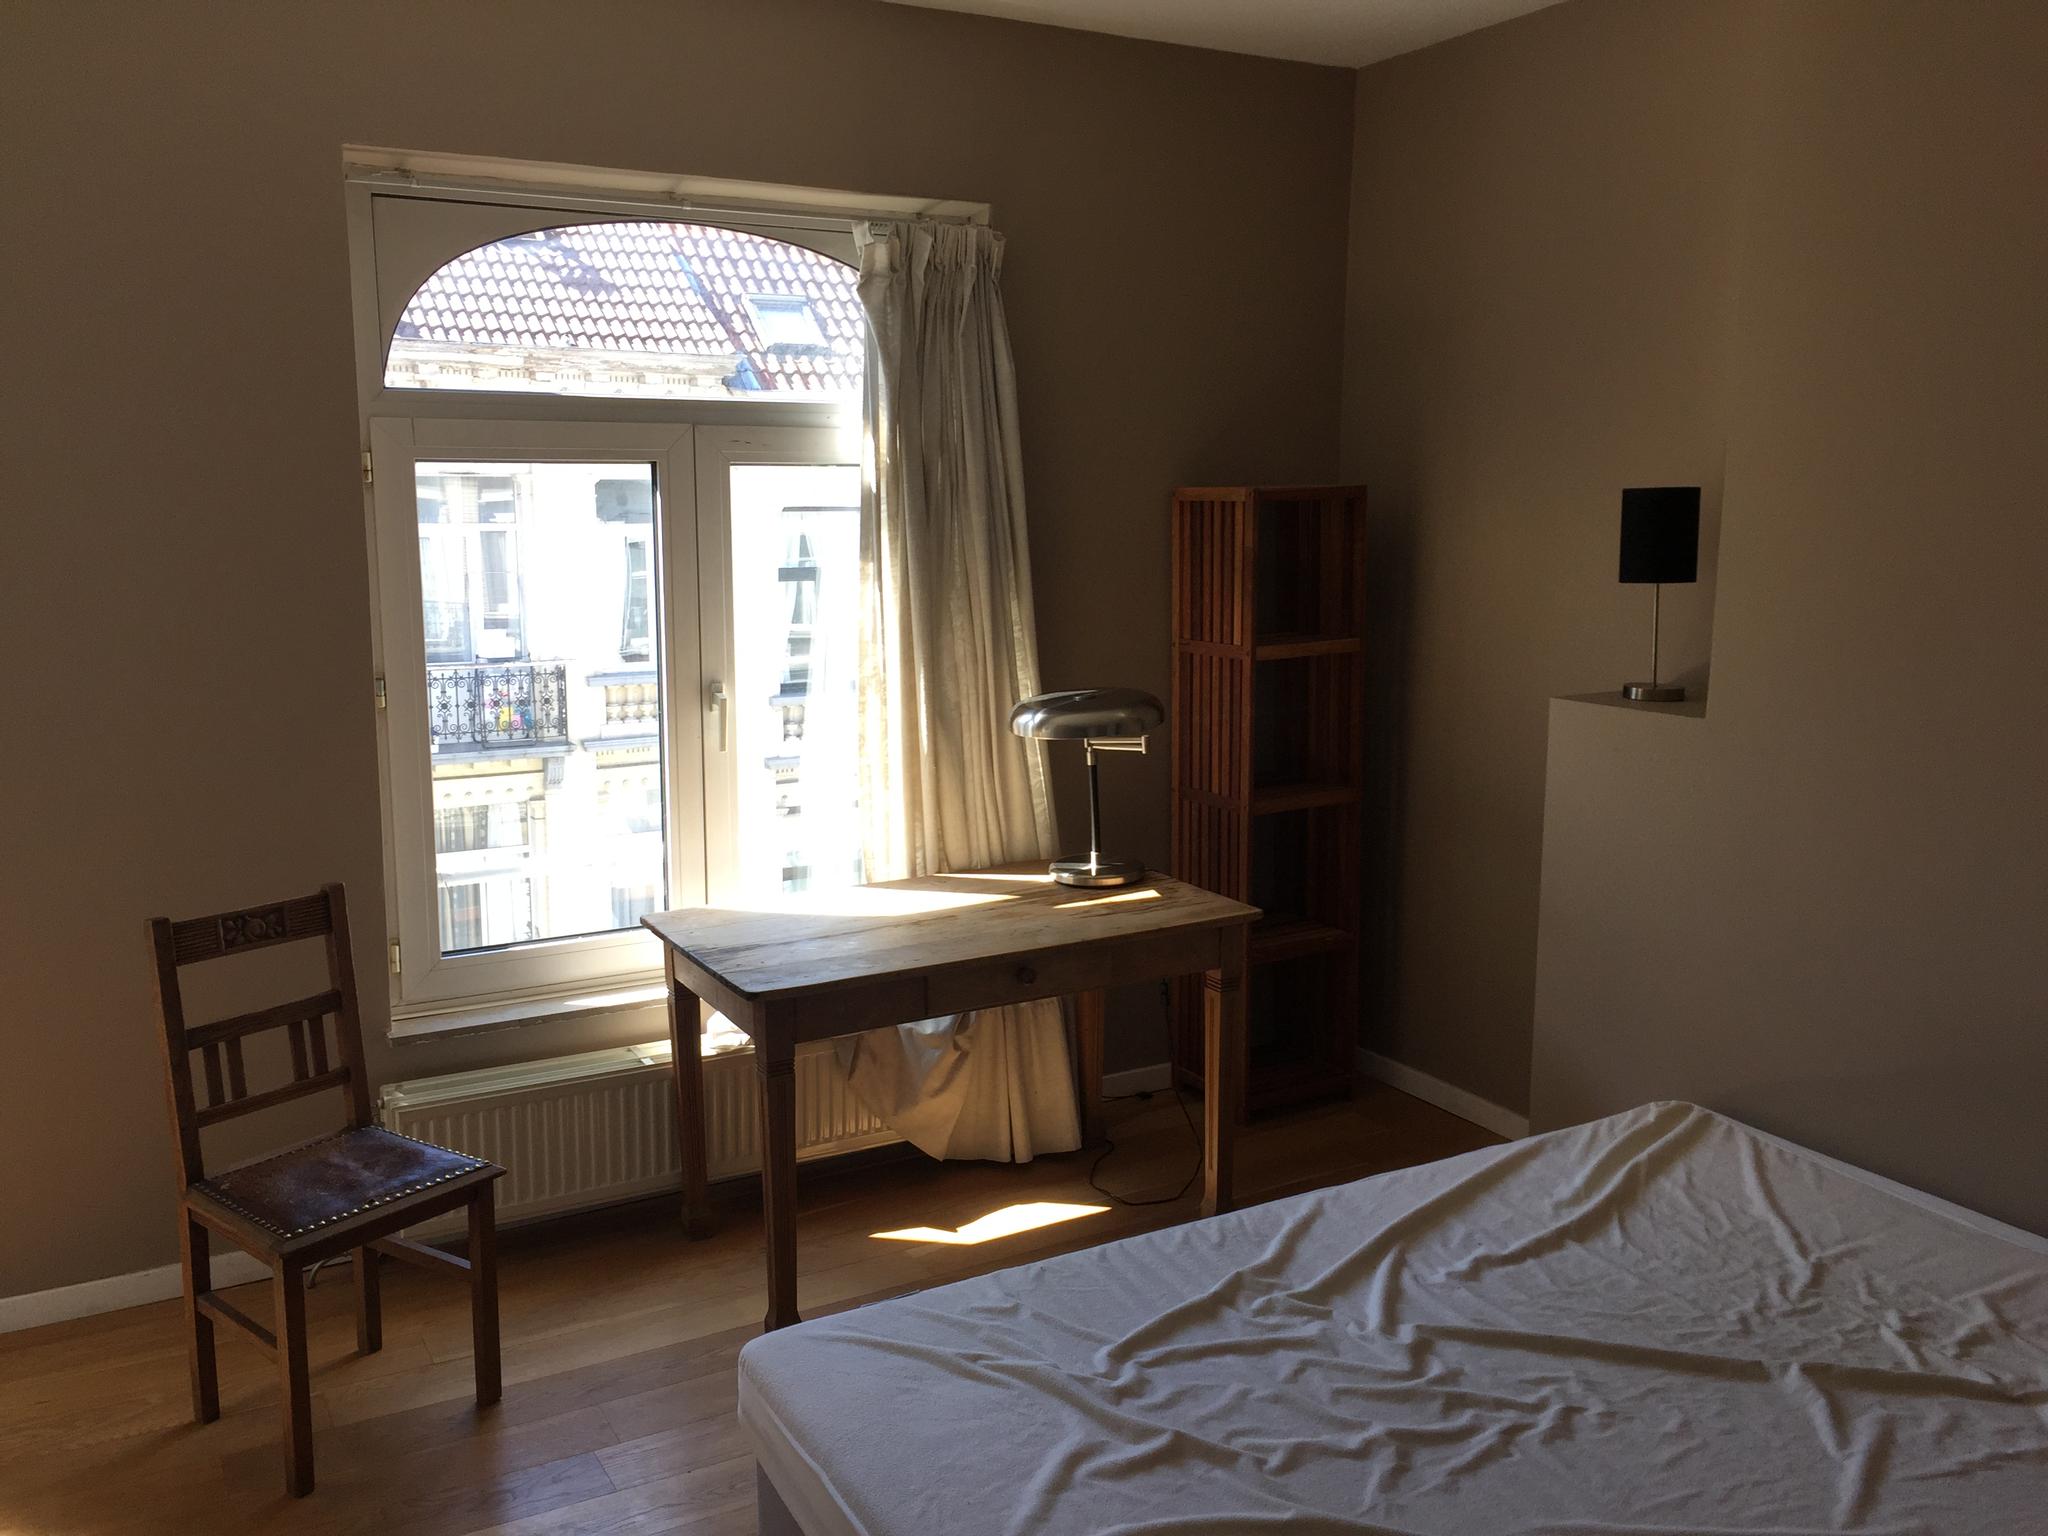 Gravelines - Shared apartment in Brussels